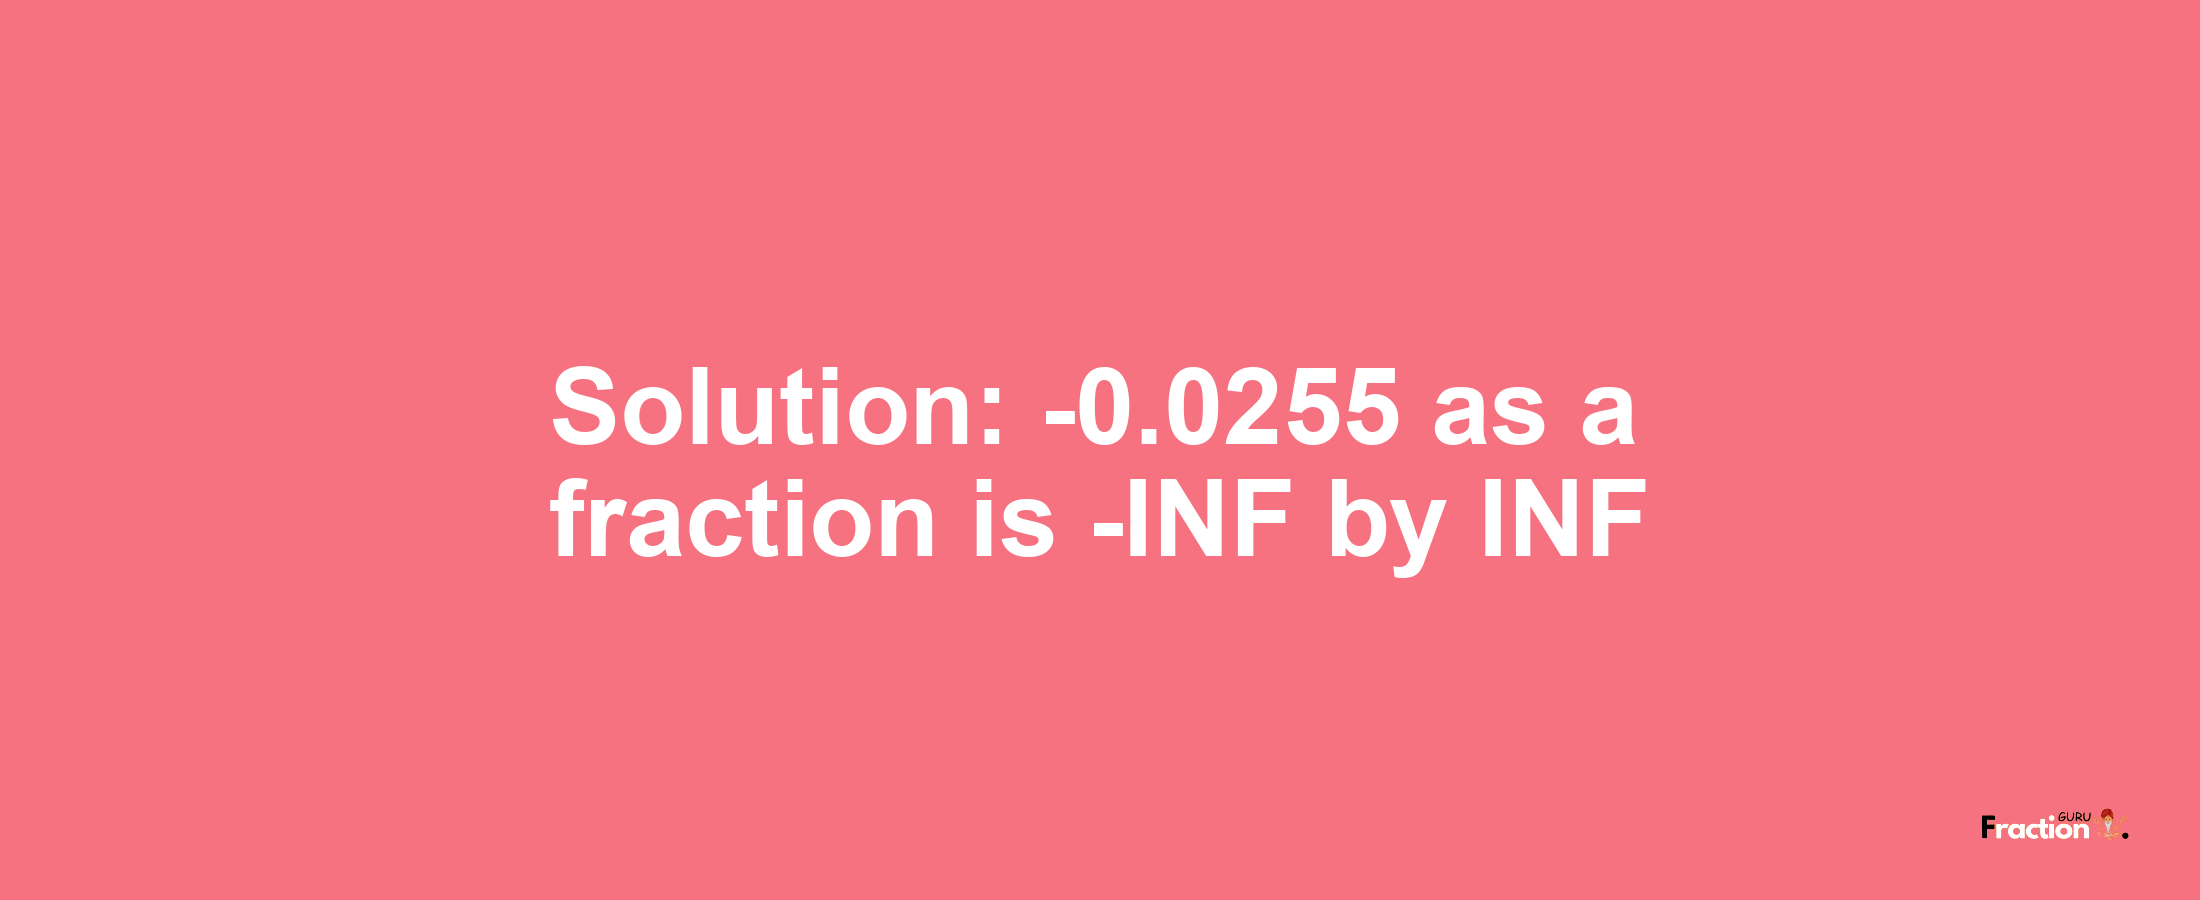 Solution:-0.0255 as a fraction is -INF/INF